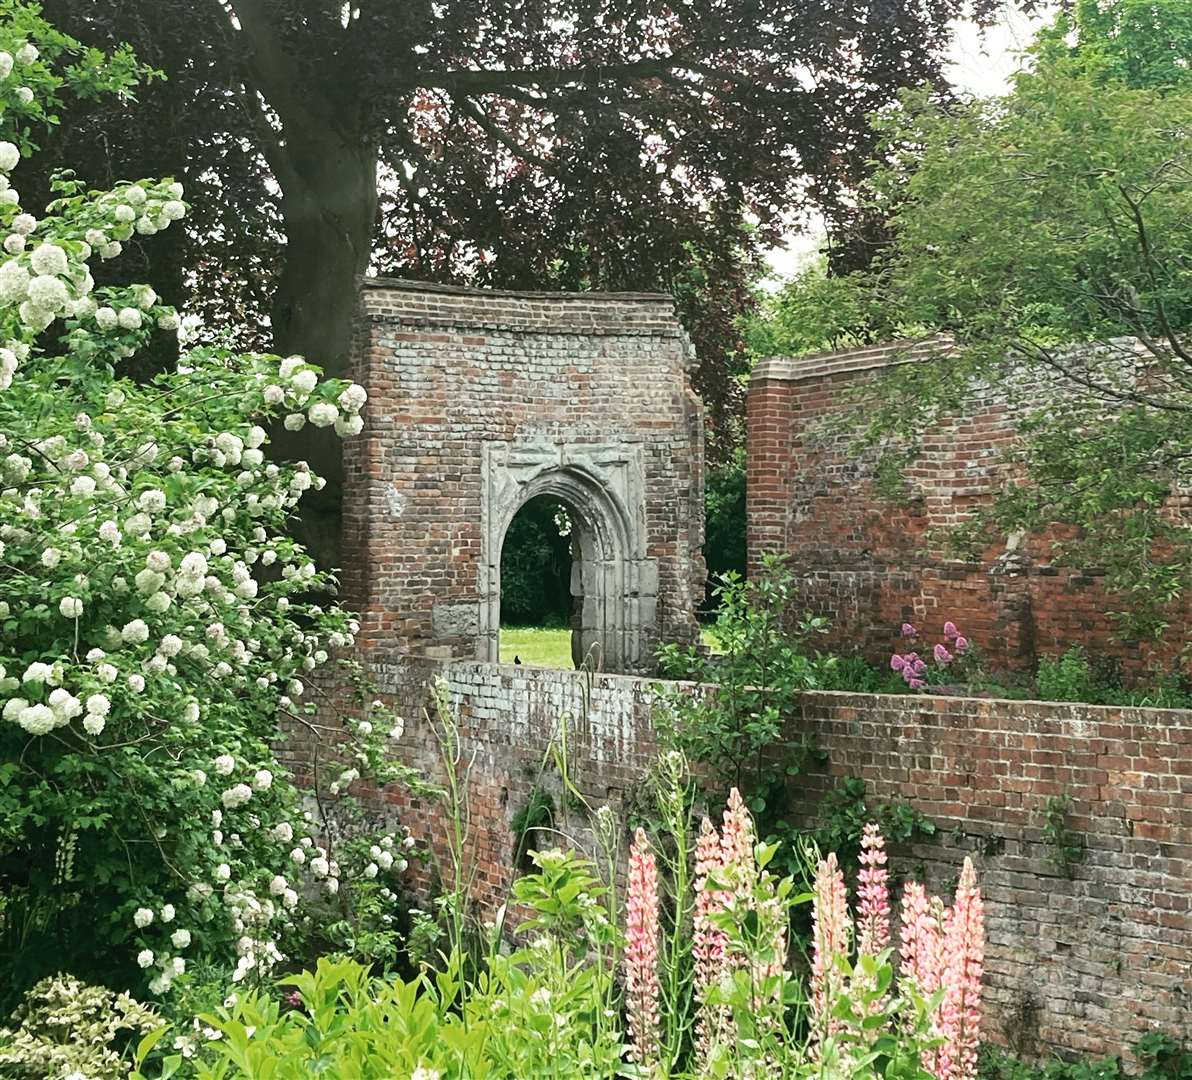 The Franciscan Gardens in Canterbury will cost £500k to repair